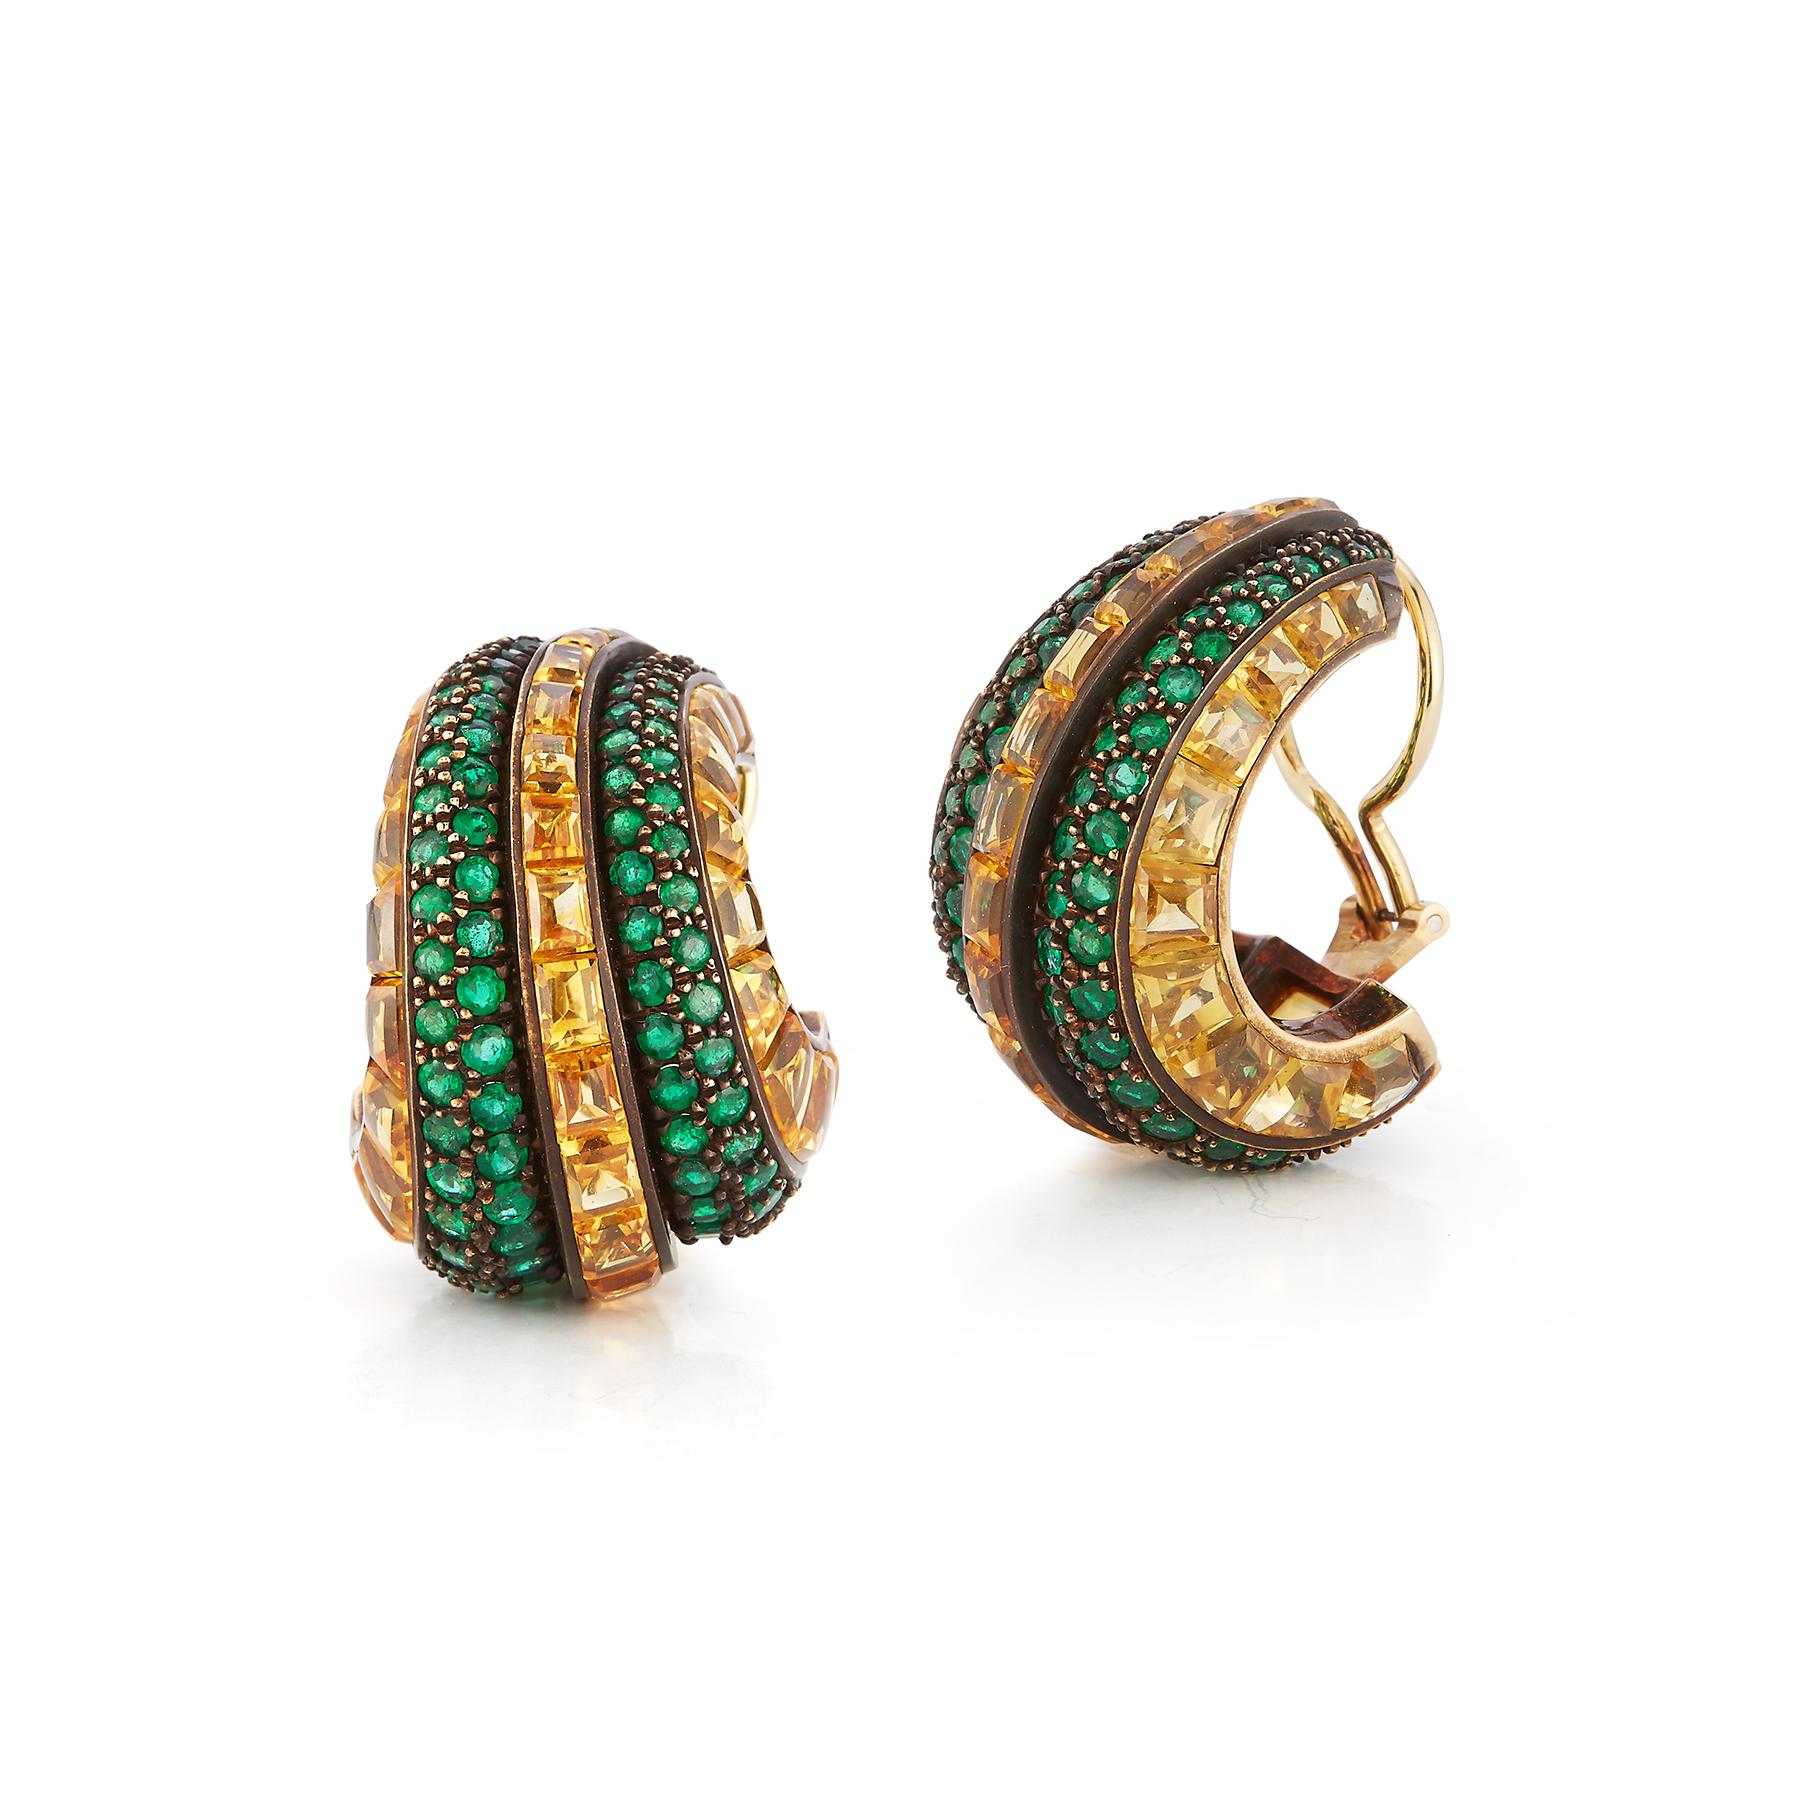 Hemmerle Yellow Sapphire and Emerald Earrings

Stylized hoop design, set with three rows of buff-top yellow sapphires, accented by two rows of round emeralds
together with signed box
signed Hemmerle, with maker's mark

App 81.98 carats of Yellow